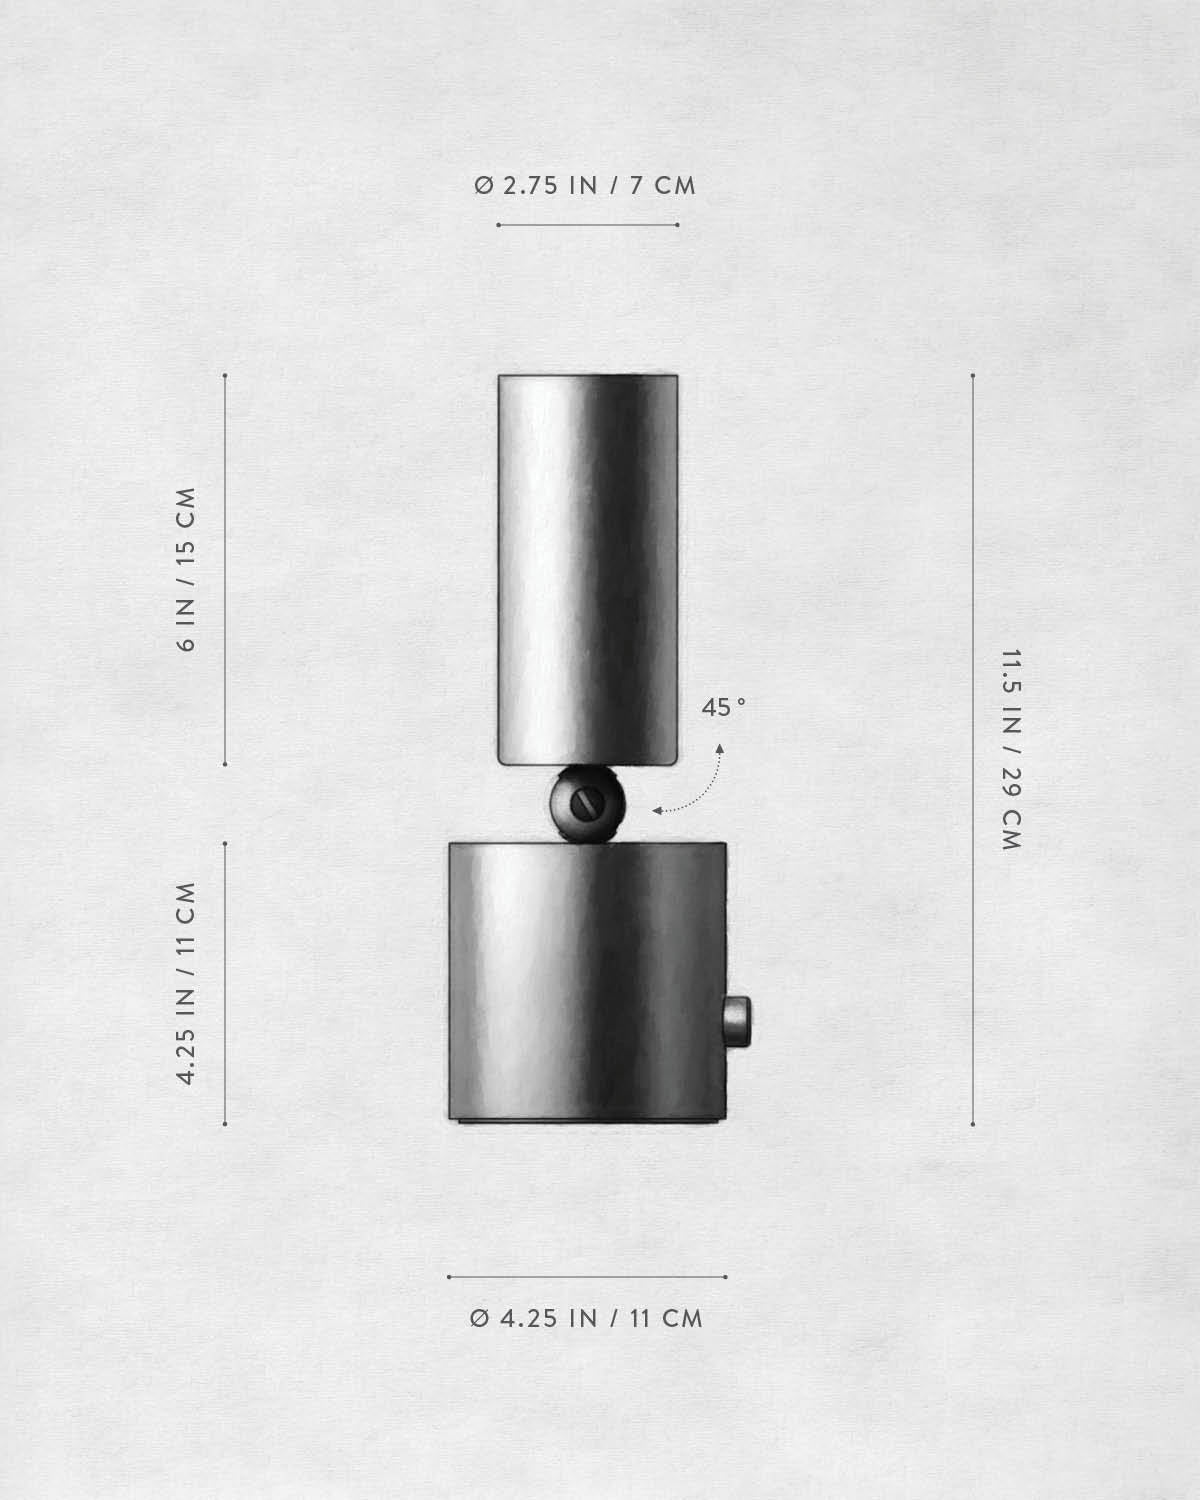 Technical drawing of CYLINDER : UPLIGHT.